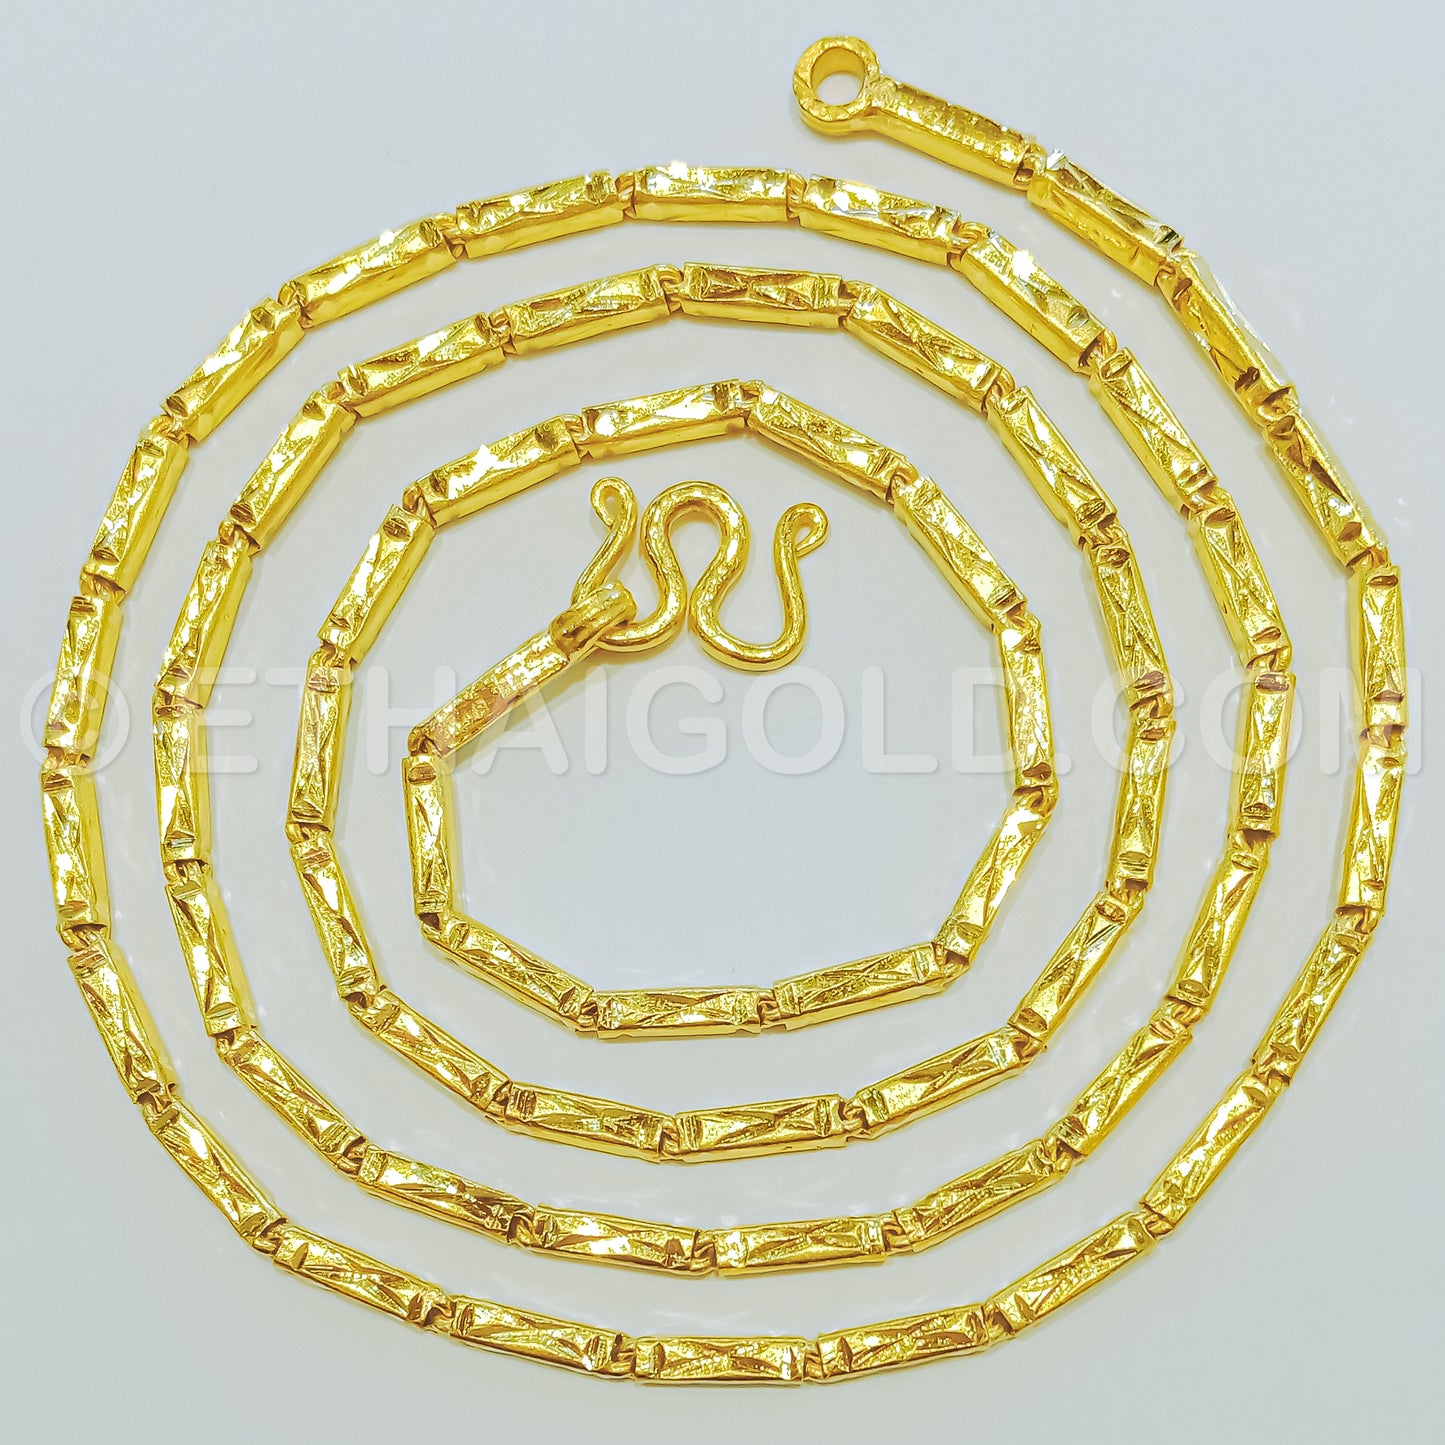 1 BAHT POLISHED DIAMOND-CUT SOLID SQUARE BARREL CHAIN NECKLACE IN 23K GOLD (ID: N3201B)